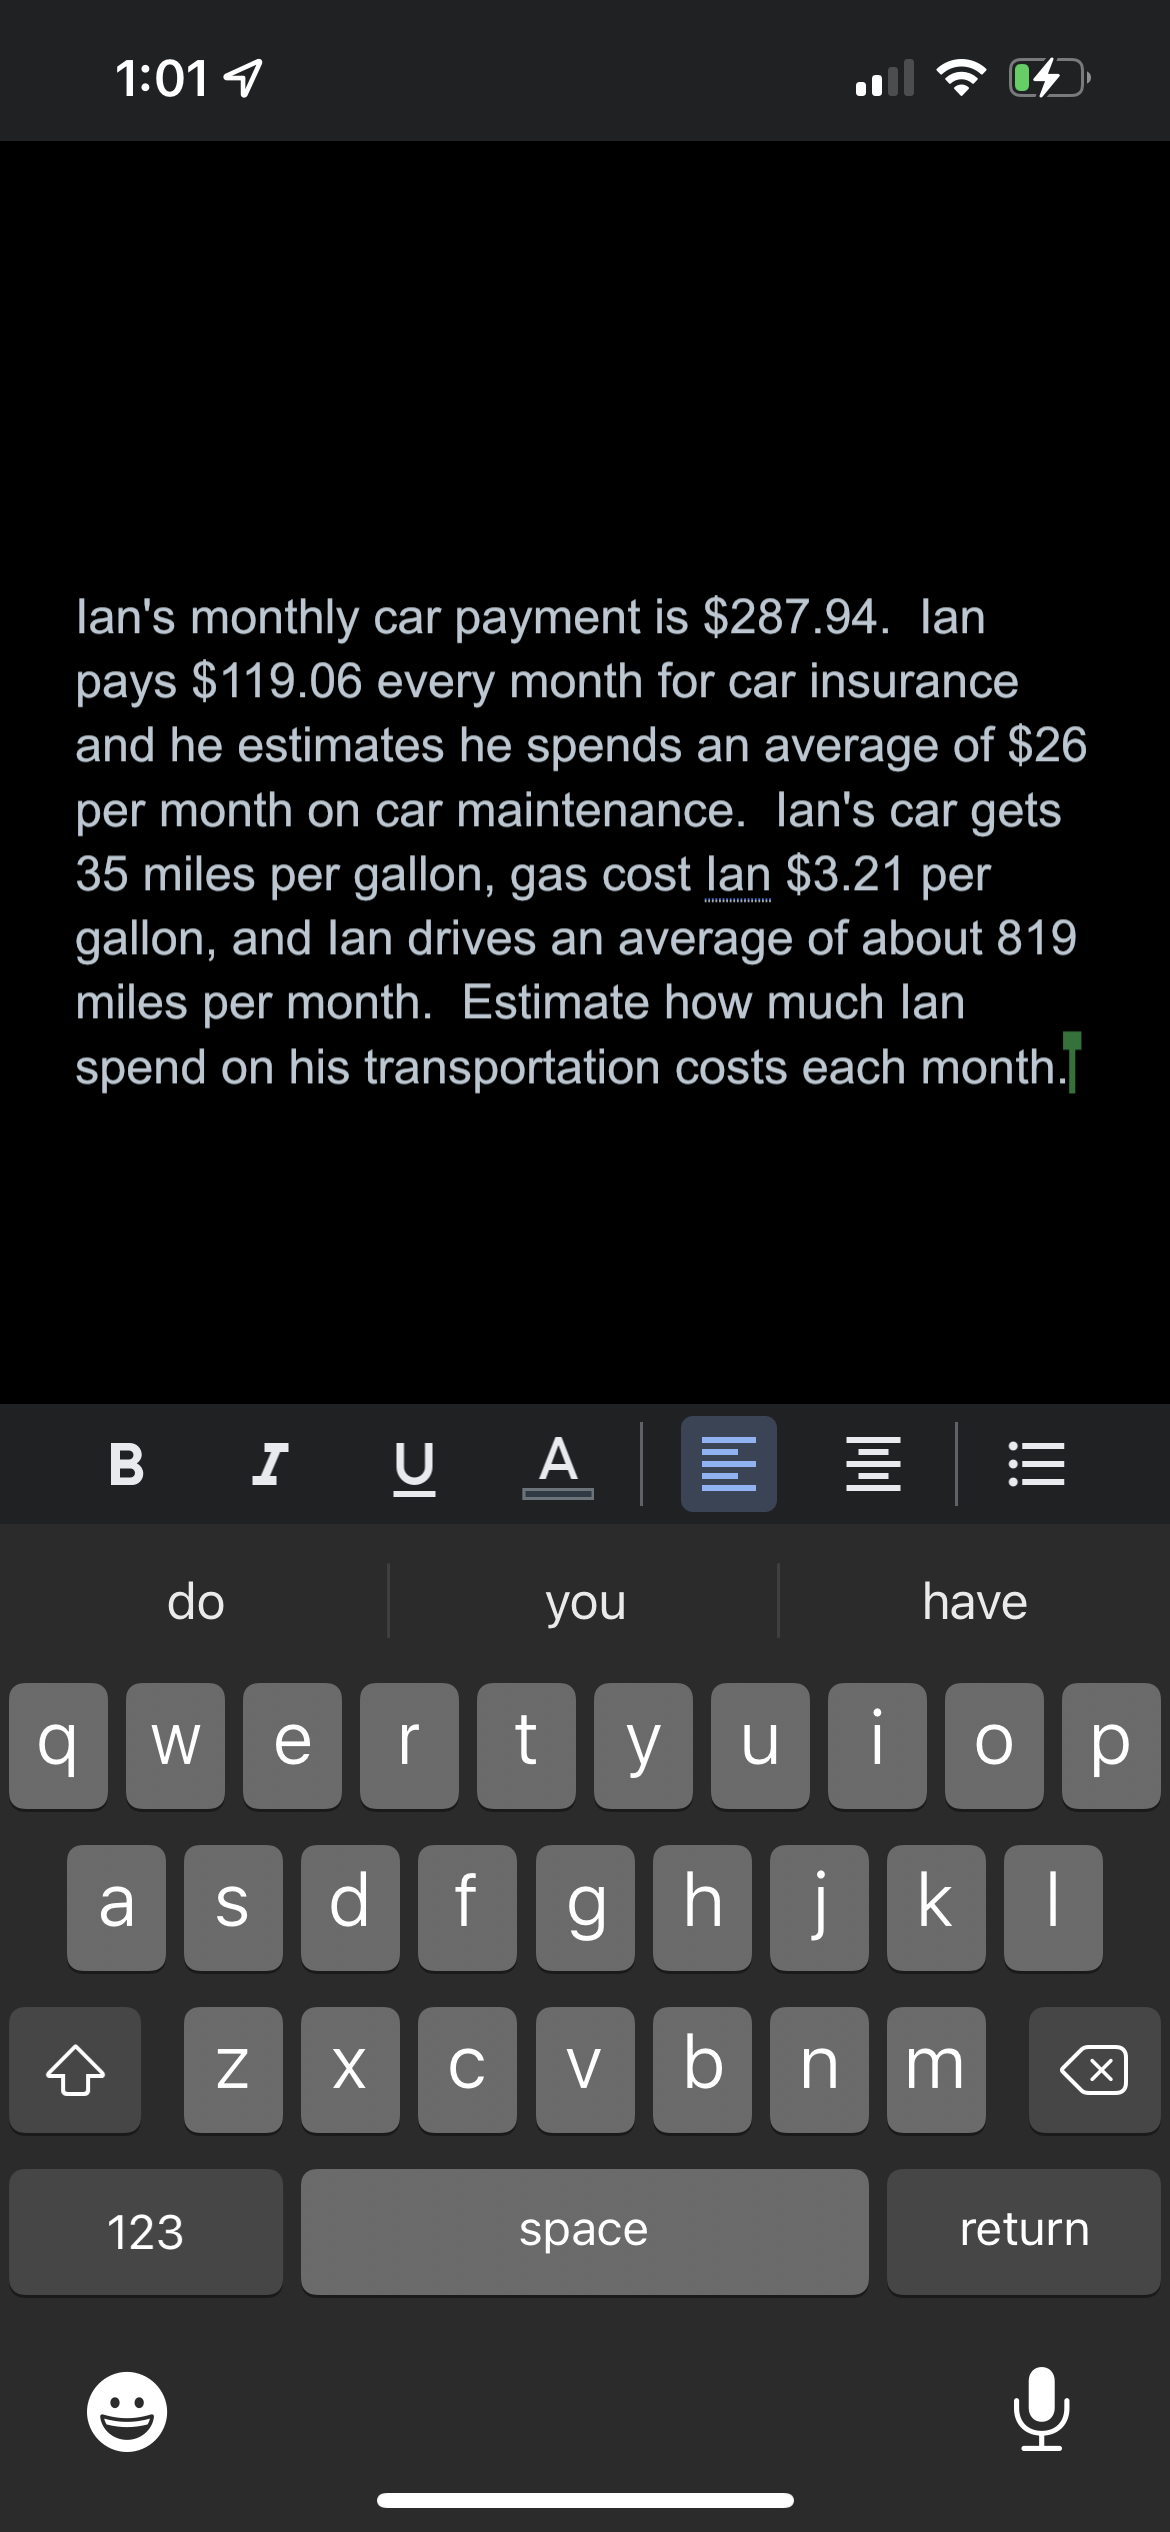 1:01
q
lan's monthly car payment is $287.94. lan
pays $119.06 every month for car insurance
and he estimates he spends an average of $26
per month on car maintenance. Ian's car gets
35 miles per gallon, gas cost lan $3.21 per
gallon, and lan drives an average of about 819
miles per month. Estimate how much lan
spend on his transportation costs each month.
B I
do
a S
123
IC
N
AE
you
We r t yu
d f ghj
i
bnm
X CV
||||
space
110
04
have
і ор
kl
return
!
X